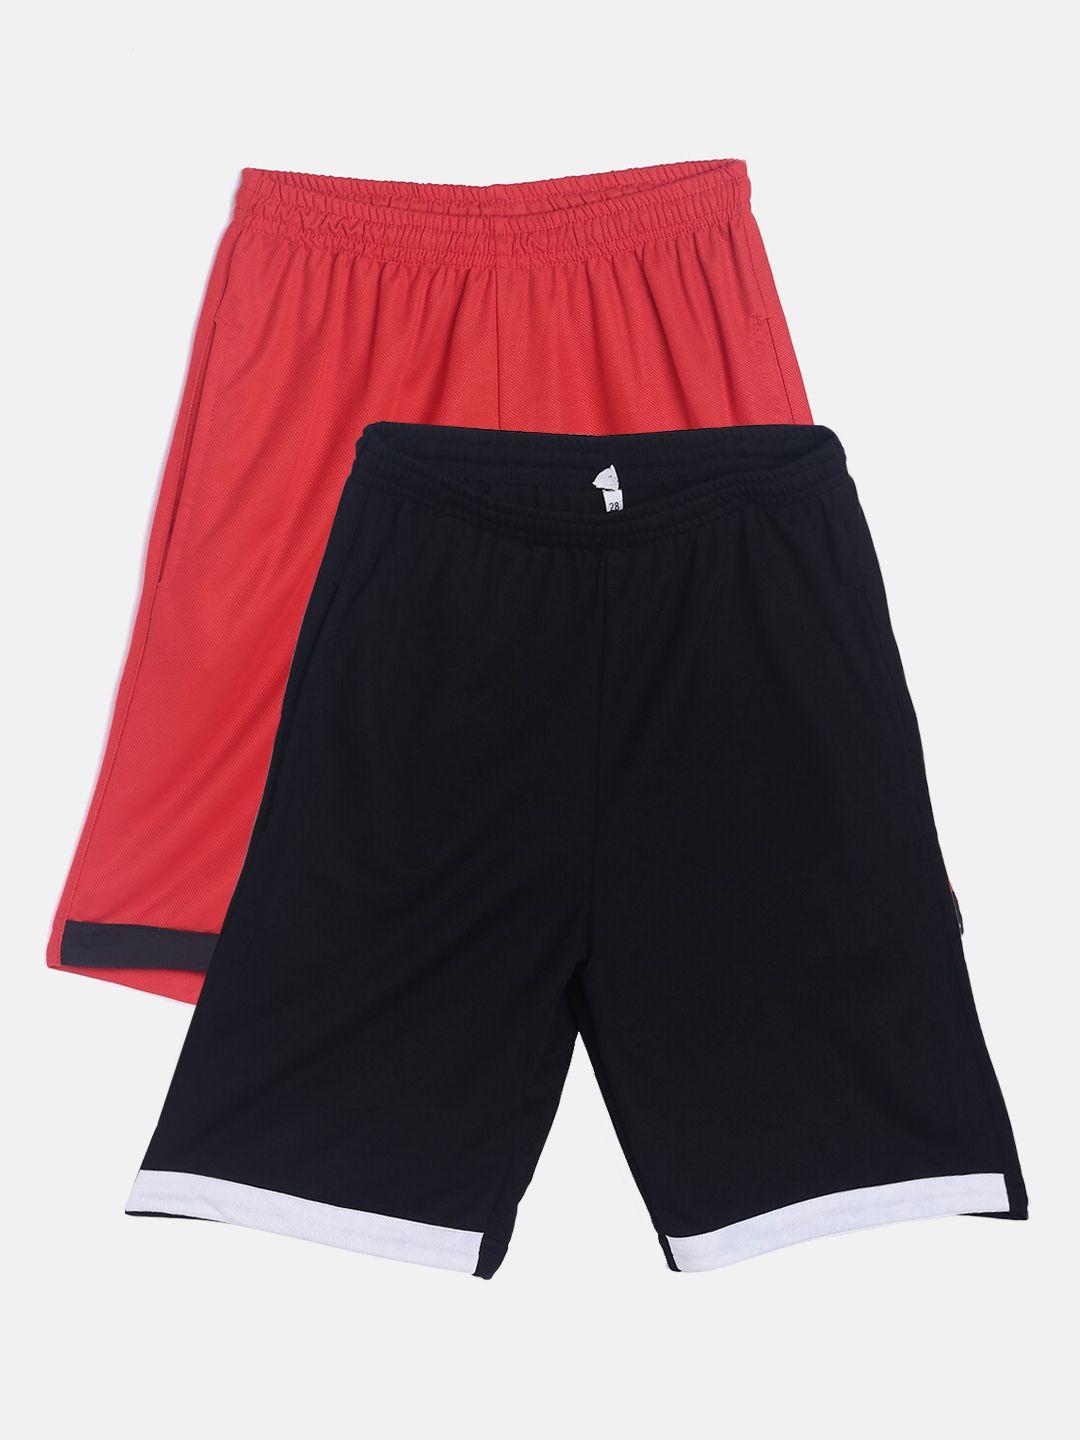 tiny hug boys pack of 2 black and red high-rise outdoor shorts